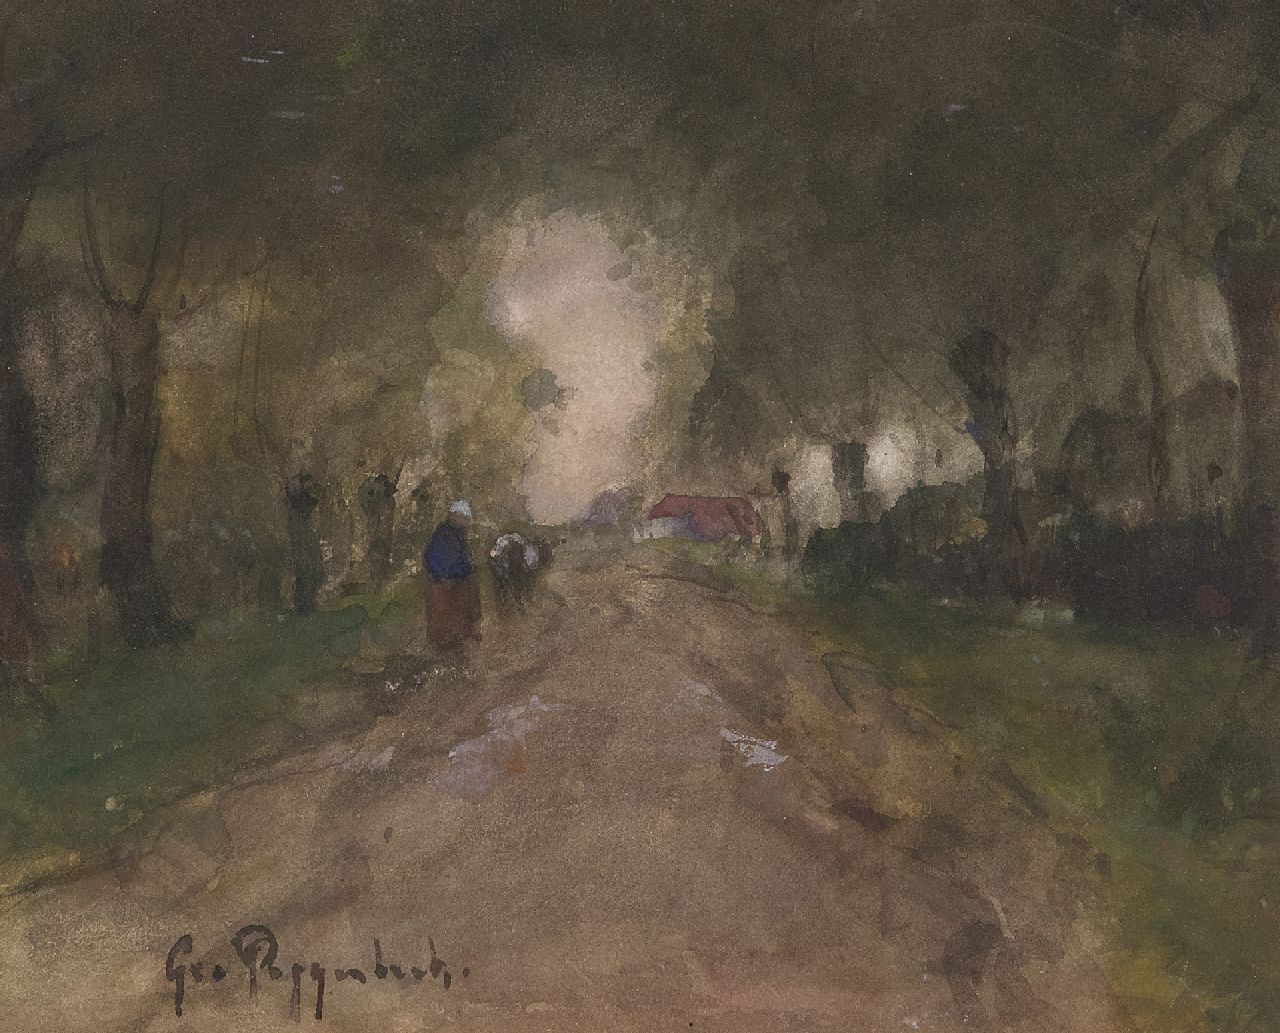 Poggenbeek G.J.H.  | George Jan Hendrik 'Geo' Poggenbeek | Watercolours and drawings offered for sale | Cowherd with cow on a country road, watercolour on paper 16.5 x 20.3 cm, signed l.l.